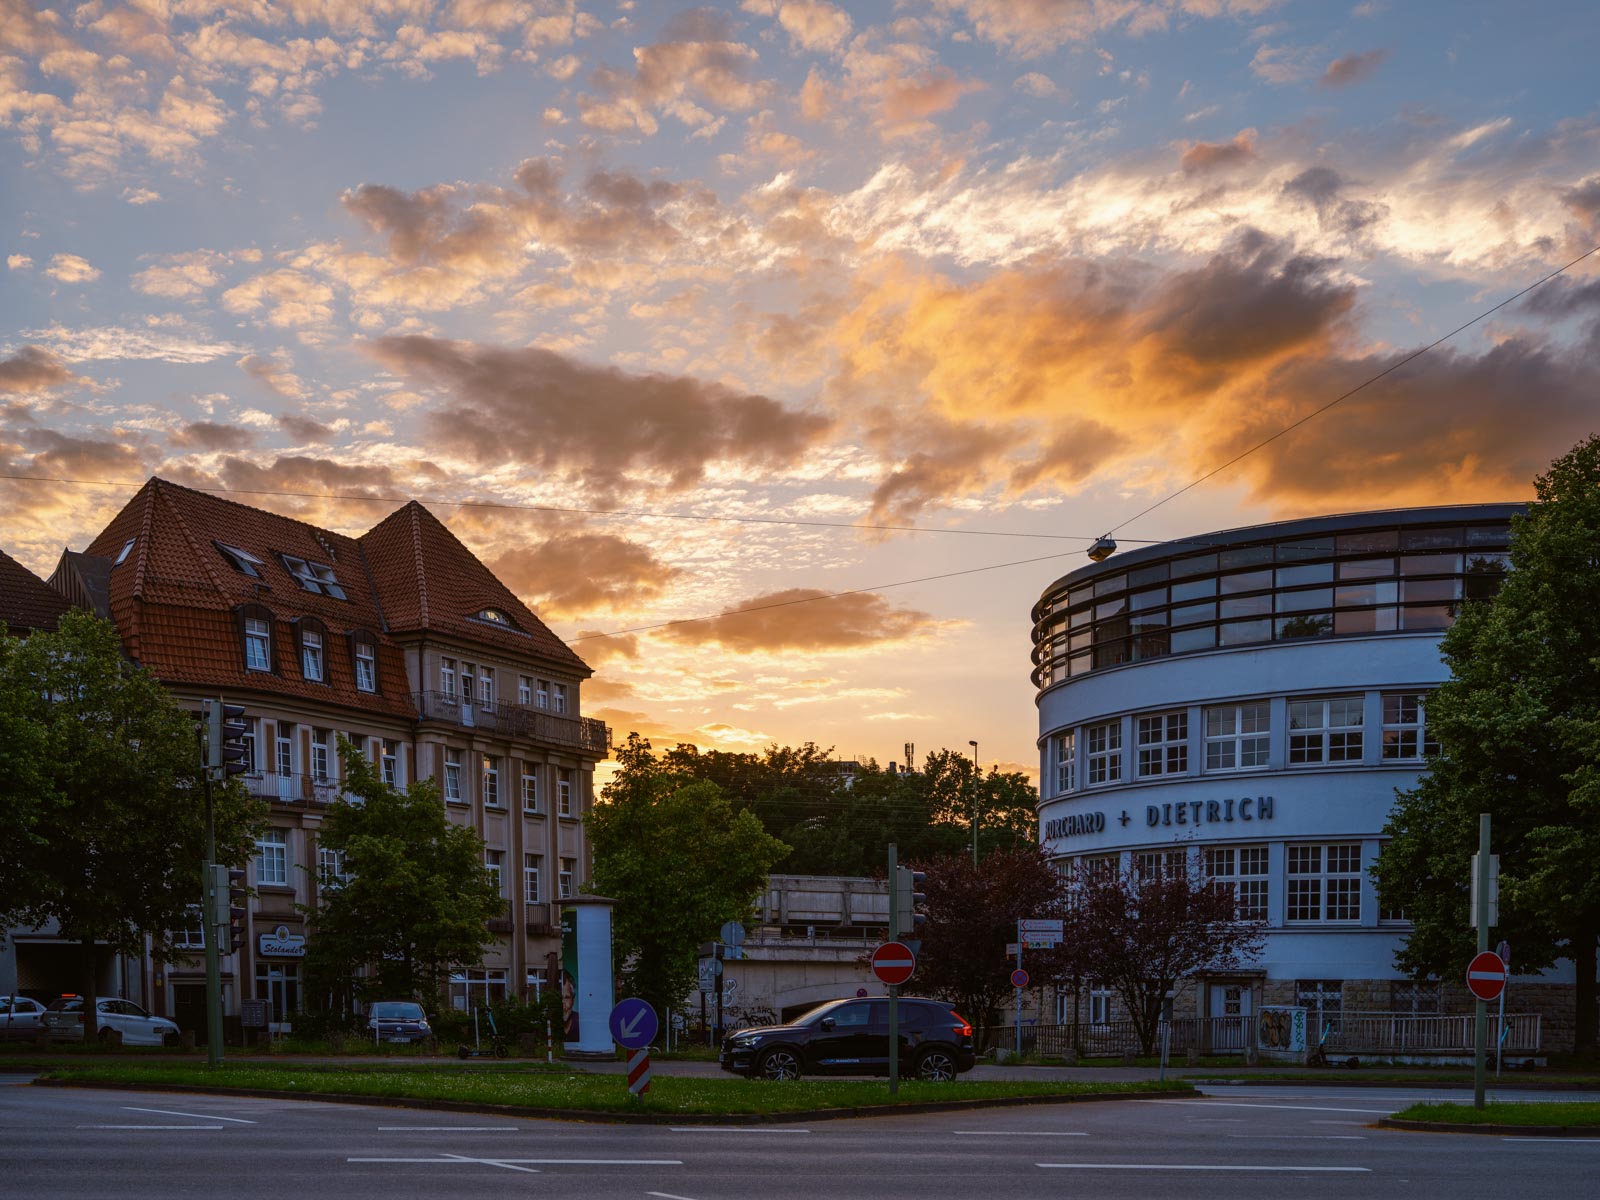 Evening clouds over downtown in July 2021 (Bielefeld, Germany).